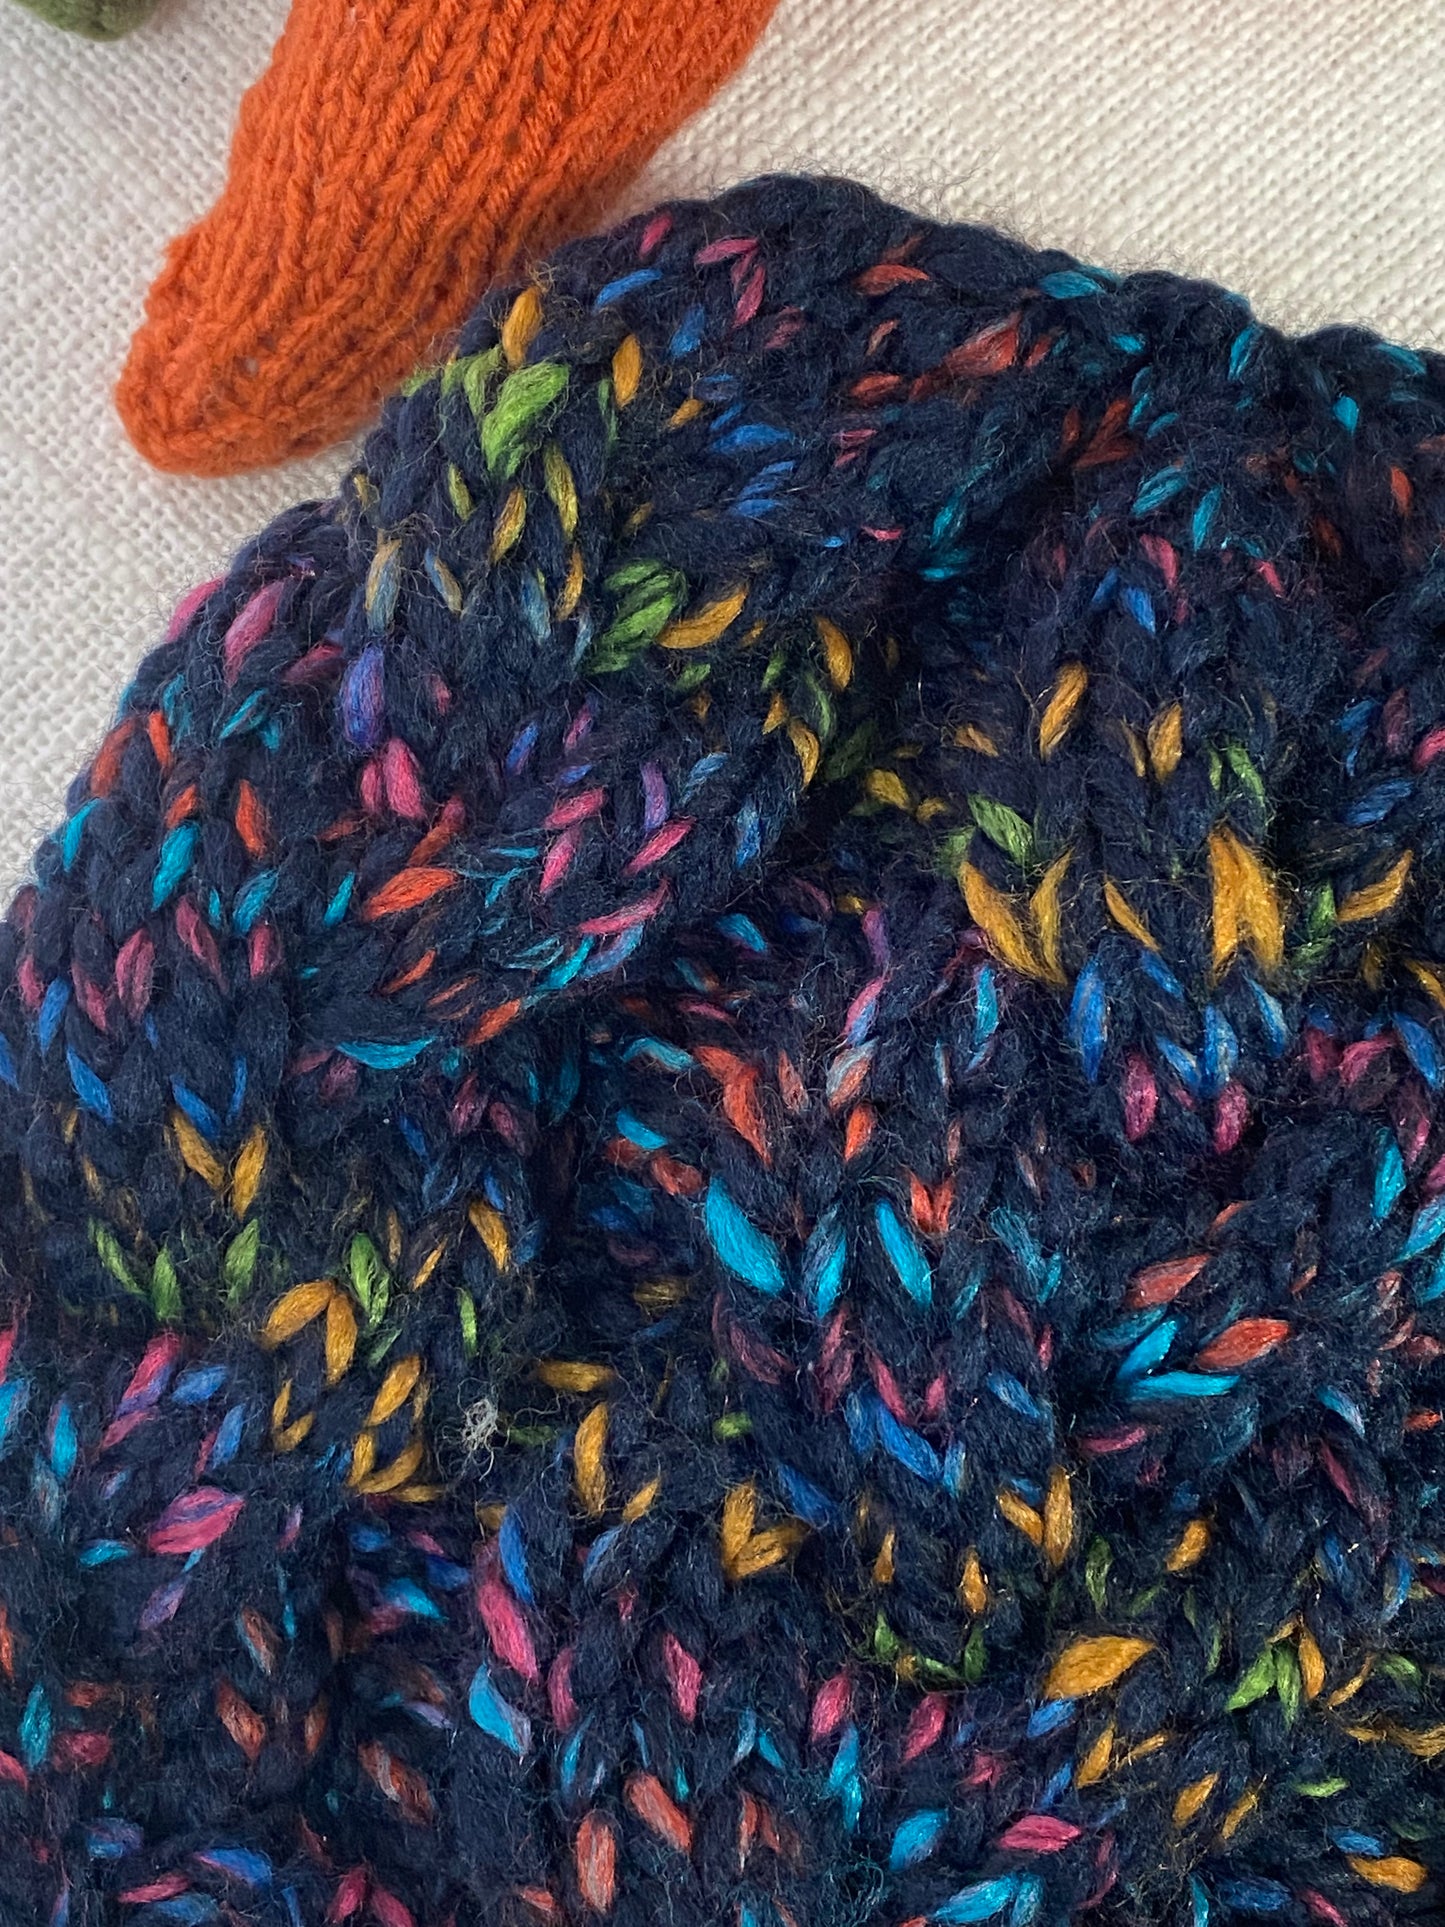 Cozy Cables Hat - Wool Blend Fiber in Arcade